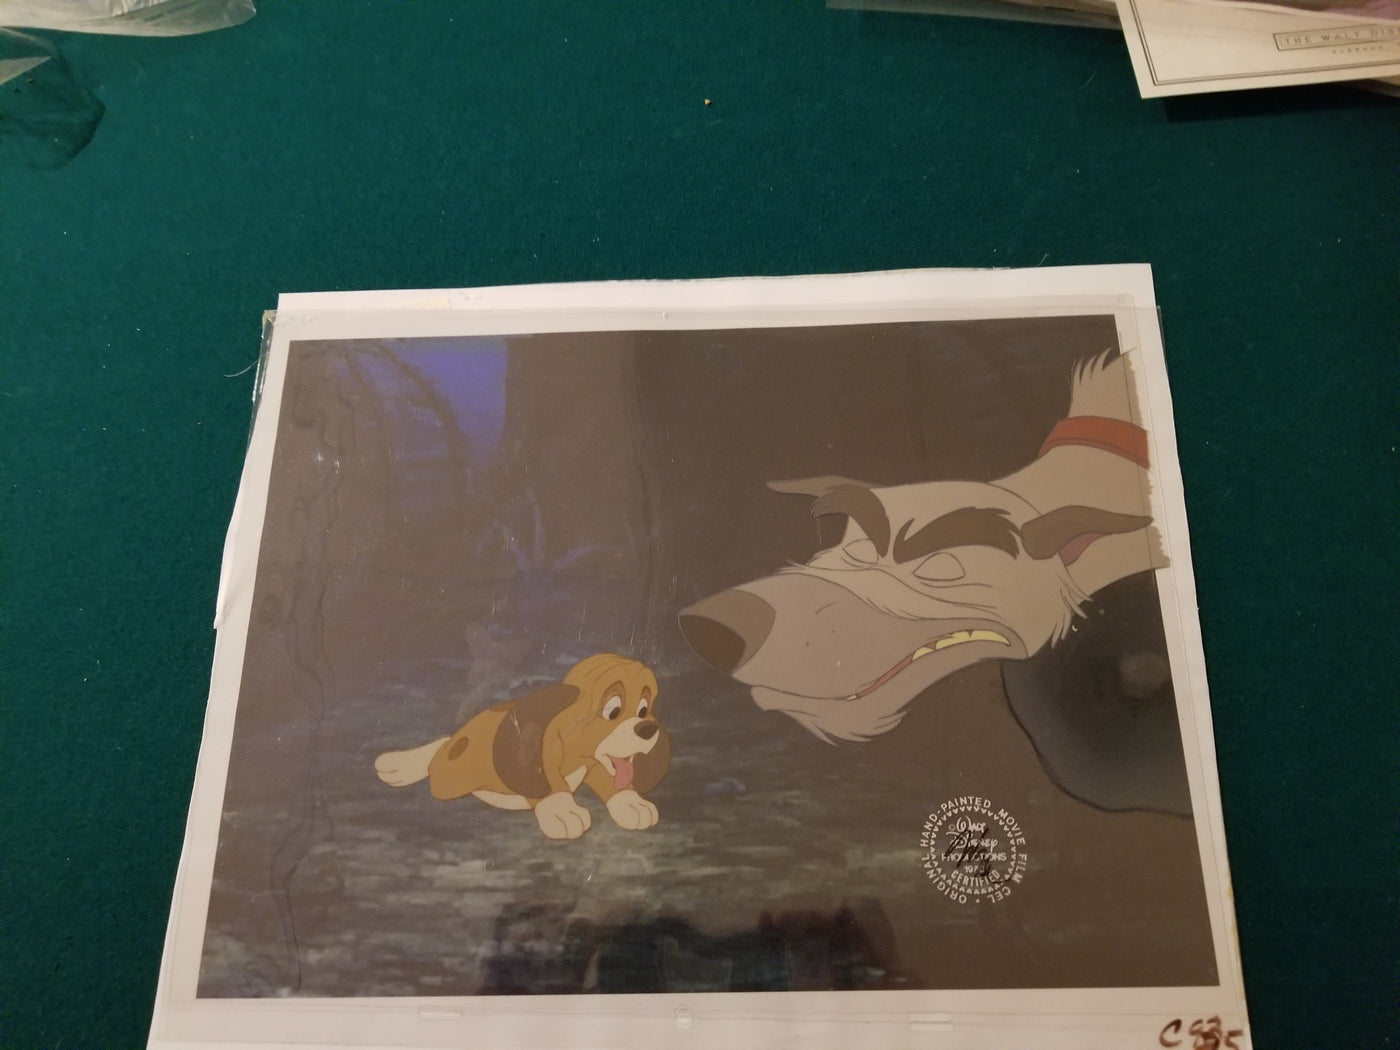 Original Walt Disney Production Cel from The Fox and the Hound featuring Copper and Chief